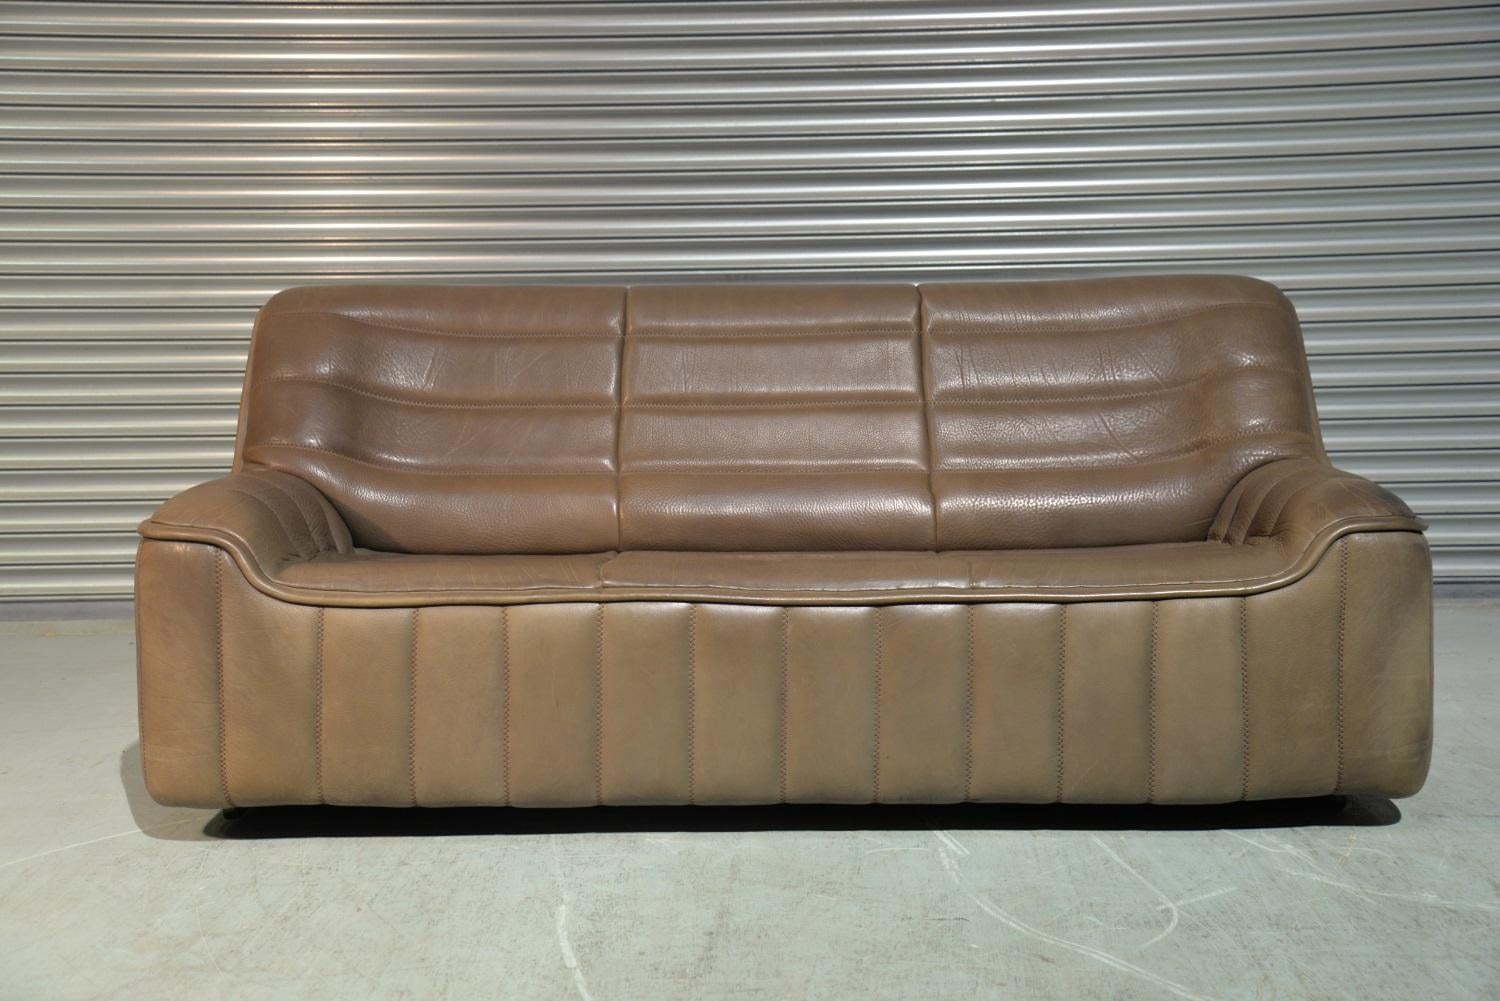 Discounted airfreight for our US and International customers (from 2 weeks door to door)

We are delighted to bring to you ultra rare vintage De Sede DS 84 leather sofa. Hand built in the 1970s by de Sede craftsman in Switzerland, this piece is